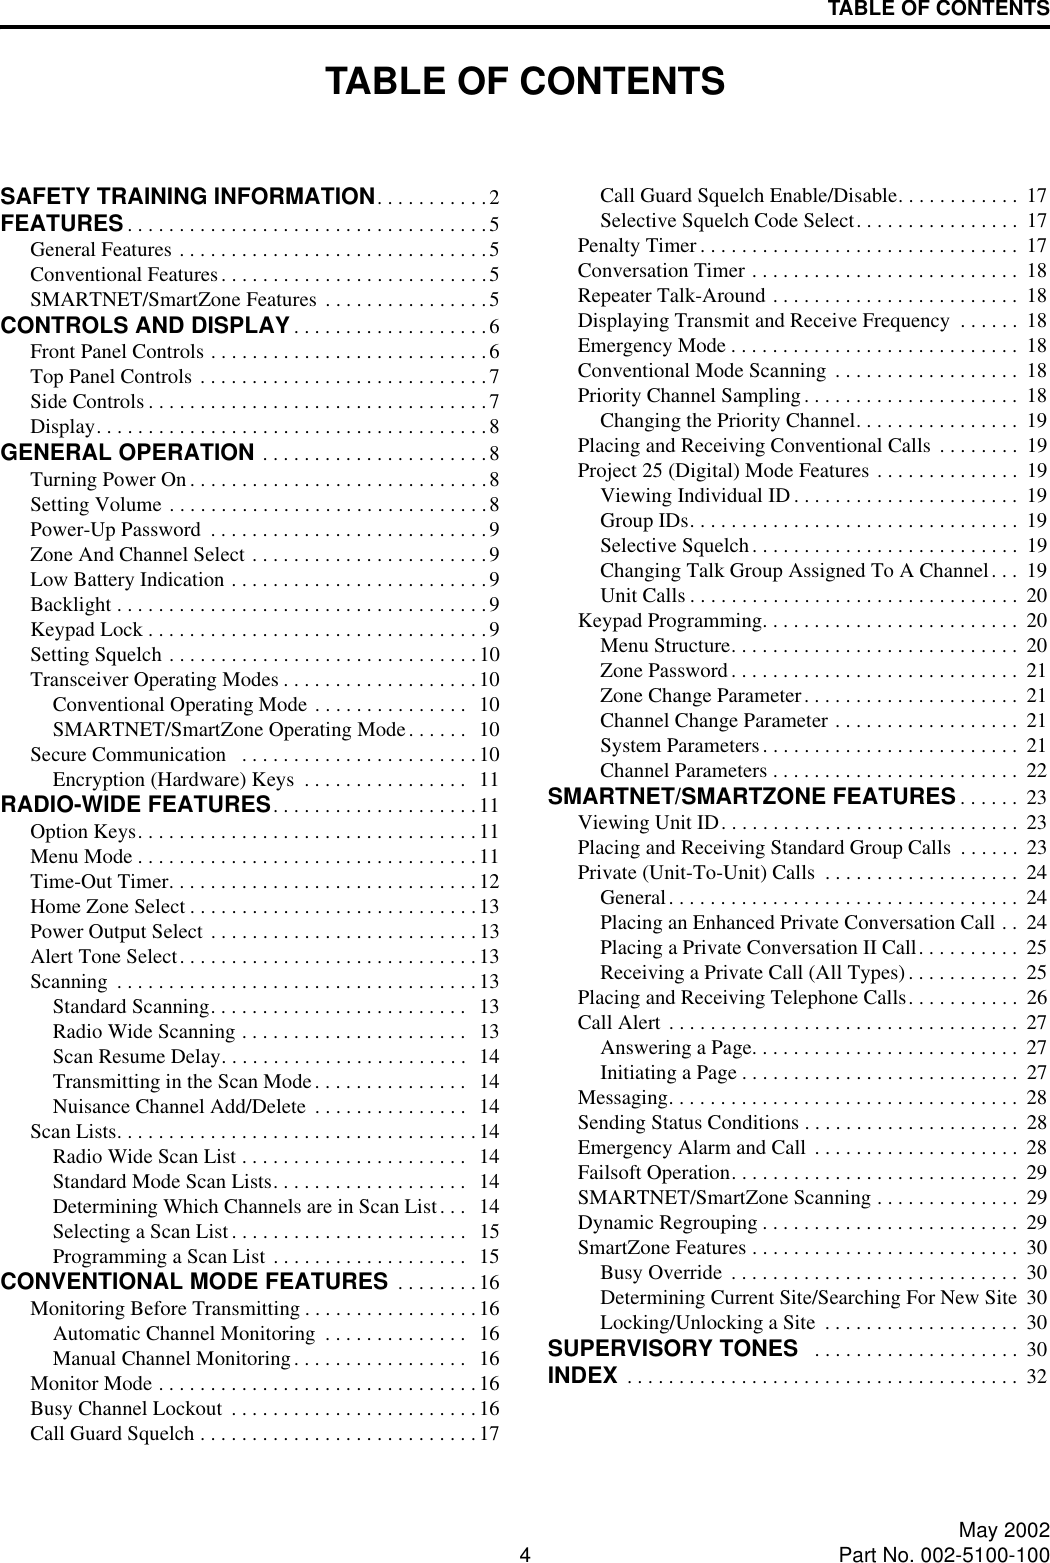 4May 2002Part No. 002-5100-100TABLE OF CONTENTSTABLE OF CONTENTSSAFETY TRAINING INFORMATION. . . . . . . . . . .2FEATURES . . . . . . . . . . . . . . . . . . . . . . . . . . . . . . . . . . .5General Features . . . . . . . . . . . . . . . . . . . . . . . . . . . . . .5Conventional Features. . . . . . . . . . . . . . . . . . . . . . . . . .5SMARTNET/SmartZone Features . . . . . . . . . . . . . . . .5CONTROLS AND DISPLAY. . . . . . . . . . . . . . . . . . .6Front Panel Controls . . . . . . . . . . . . . . . . . . . . . . . . . . .6Top Panel Controls . . . . . . . . . . . . . . . . . . . . . . . . . . . .7Side Controls . . . . . . . . . . . . . . . . . . . . . . . . . . . . . . . . .7Display. . . . . . . . . . . . . . . . . . . . . . . . . . . . . . . . . . . . . .8GENERAL OPERATION . . . . . . . . . . . . . . . . . . . . . .8Turning Power On. . . . . . . . . . . . . . . . . . . . . . . . . . . . .8Setting Volume . . . . . . . . . . . . . . . . . . . . . . . . . . . . . . .8Power-Up Password  . . . . . . . . . . . . . . . . . . . . . . . . . . .9Zone And Channel Select . . . . . . . . . . . . . . . . . . . . . . .9Low Battery Indication . . . . . . . . . . . . . . . . . . . . . . . . .9Backlight . . . . . . . . . . . . . . . . . . . . . . . . . . . . . . . . . . . .9Keypad Lock . . . . . . . . . . . . . . . . . . . . . . . . . . . . . . . . .9Setting Squelch . . . . . . . . . . . . . . . . . . . . . . . . . . . . . .10Transceiver Operating Modes . . . . . . . . . . . . . . . . . . .10Conventional Operating Mode . . . . . . . . . . . . . . .  10SMARTNET/SmartZone Operating Mode. . . . . .  10Secure Communication   . . . . . . . . . . . . . . . . . . . . . . .10Encryption (Hardware) Keys  . . . . . . . . . . . . . . . .  11RADIO-WIDE FEATURES. . . . . . . . . . . . . . . . . . . .11Option Keys. . . . . . . . . . . . . . . . . . . . . . . . . . . . . . . . . 11Menu Mode . . . . . . . . . . . . . . . . . . . . . . . . . . . . . . . . .11Time-Out Timer. . . . . . . . . . . . . . . . . . . . . . . . . . . . . .12Home Zone Select . . . . . . . . . . . . . . . . . . . . . . . . . . . .13Power Output Select . . . . . . . . . . . . . . . . . . . . . . . . . . 13Alert Tone Select. . . . . . . . . . . . . . . . . . . . . . . . . . . . .13Scanning  . . . . . . . . . . . . . . . . . . . . . . . . . . . . . . . . . . .13Standard Scanning. . . . . . . . . . . . . . . . . . . . . . . . .   13Radio Wide Scanning . . . . . . . . . . . . . . . . . . . . . .  13Scan Resume Delay. . . . . . . . . . . . . . . . . . . . . . . .  14Transmitting in the Scan Mode. . . . . . . . . . . . . . .  14Nuisance Channel Add/Delete  . . . . . . . . . . . . . . .  14Scan Lists. . . . . . . . . . . . . . . . . . . . . . . . . . . . . . . . . . .14Radio Wide Scan List . . . . . . . . . . . . . . . . . . . . . .  14Standard Mode Scan Lists. . . . . . . . . . . . . . . . . . .  14Determining Which Channels are in Scan List. . .  14Selecting a Scan List. . . . . . . . . . . . . . . . . . . . . . .  15Programming a Scan List . . . . . . . . . . . . . . . . . . .  15CONVENTIONAL MODE FEATURES  . . . . . . . .16Monitoring Before Transmitting . . . . . . . . . . . . . . . . .16Automatic Channel Monitoring  . . . . . . . . . . . . . .  16Manual Channel Monitoring. . . . . . . . . . . . . . . . .  16Monitor Mode . . . . . . . . . . . . . . . . . . . . . . . . . . . . . . .16Busy Channel Lockout  . . . . . . . . . . . . . . . . . . . . . . . .16Call Guard Squelch . . . . . . . . . . . . . . . . . . . . . . . . . . .17Call Guard Squelch Enable/Disable. . . . . . . . . . . .  17Selective Squelch Code Select. . . . . . . . . . . . . . . .  17Penalty Timer . . . . . . . . . . . . . . . . . . . . . . . . . . . . . . .  17Conversation Timer . . . . . . . . . . . . . . . . . . . . . . . . . .  18Repeater Talk-Around . . . . . . . . . . . . . . . . . . . . . . . .  18Displaying Transmit and Receive Frequency  . . . . . .  18Emergency Mode . . . . . . . . . . . . . . . . . . . . . . . . . . . .  18Conventional Mode Scanning  . . . . . . . . . . . . . . . . . .  18Priority Channel Sampling . . . . . . . . . . . . . . . . . . . . .  18Changing the Priority Channel. . . . . . . . . . . . . . . .  19Placing and Receiving Conventional Calls  . . . . . . . .  19Project 25 (Digital) Mode Features . . . . . . . . . . . . . .  19Viewing Individual ID. . . . . . . . . . . . . . . . . . . . . .  19Group IDs. . . . . . . . . . . . . . . . . . . . . . . . . . . . . . . .  19Selective Squelch. . . . . . . . . . . . . . . . . . . . . . . . . .  19Changing Talk Group Assigned To A Channel. . .  19Unit Calls . . . . . . . . . . . . . . . . . . . . . . . . . . . . . . . .  20Keypad Programming. . . . . . . . . . . . . . . . . . . . . . . . .  20Menu Structure. . . . . . . . . . . . . . . . . . . . . . . . . . . .  20Zone Password. . . . . . . . . . . . . . . . . . . . . . . . . . . .  21Zone Change Parameter. . . . . . . . . . . . . . . . . . . . .  21Channel Change Parameter . . . . . . . . . . . . . . . . . .  21System Parameters. . . . . . . . . . . . . . . . . . . . . . . . .  21Channel Parameters . . . . . . . . . . . . . . . . . . . . . . . .  22SMARTNET/SMARTZONE FEATURES . . . . . .  23Viewing Unit ID. . . . . . . . . . . . . . . . . . . . . . . . . . . . .  23Placing and Receiving Standard Group Calls  . . . . . .  23Private (Unit-To-Unit) Calls  . . . . . . . . . . . . . . . . . . .  24General. . . . . . . . . . . . . . . . . . . . . . . . . . . . . . . . . .  24Placing an Enhanced Private Conversation Call . .  24Placing a Private Conversation II Call. . . . . . . . . .  25Receiving a Private Call (All Types) . . . . . . . . . . .  25Placing and Receiving Telephone Calls. . . . . . . . . . .  26Call Alert . . . . . . . . . . . . . . . . . . . . . . . . . . . . . . . . . .  27Answering a Page. . . . . . . . . . . . . . . . . . . . . . . . . .  27Initiating a Page . . . . . . . . . . . . . . . . . . . . . . . . . . .  27Messaging. . . . . . . . . . . . . . . . . . . . . . . . . . . . . . . . . .  28Sending Status Conditions . . . . . . . . . . . . . . . . . . . . .  28Emergency Alarm and Call  . . . . . . . . . . . . . . . . . . . .  28Failsoft Operation. . . . . . . . . . . . . . . . . . . . . . . . . . . .  29SMARTNET/SmartZone Scanning . . . . . . . . . . . . . .  29Dynamic Regrouping . . . . . . . . . . . . . . . . . . . . . . . . .  29SmartZone Features . . . . . . . . . . . . . . . . . . . . . . . . . .  30Busy Override . . . . . . . . . . . . . . . . . . . . . . . . . . . .  30Determining Current Site/Searching For New Site  30Locking/Unlocking a Site  . . . . . . . . . . . . . . . . . . .  30SUPERVISORY TONES   . . . . . . . . . . . . . . . . . . . .  30INDEX  . . . . . . . . . . . . . . . . . . . . . . . . . . . . . . . . . . . . . .  32